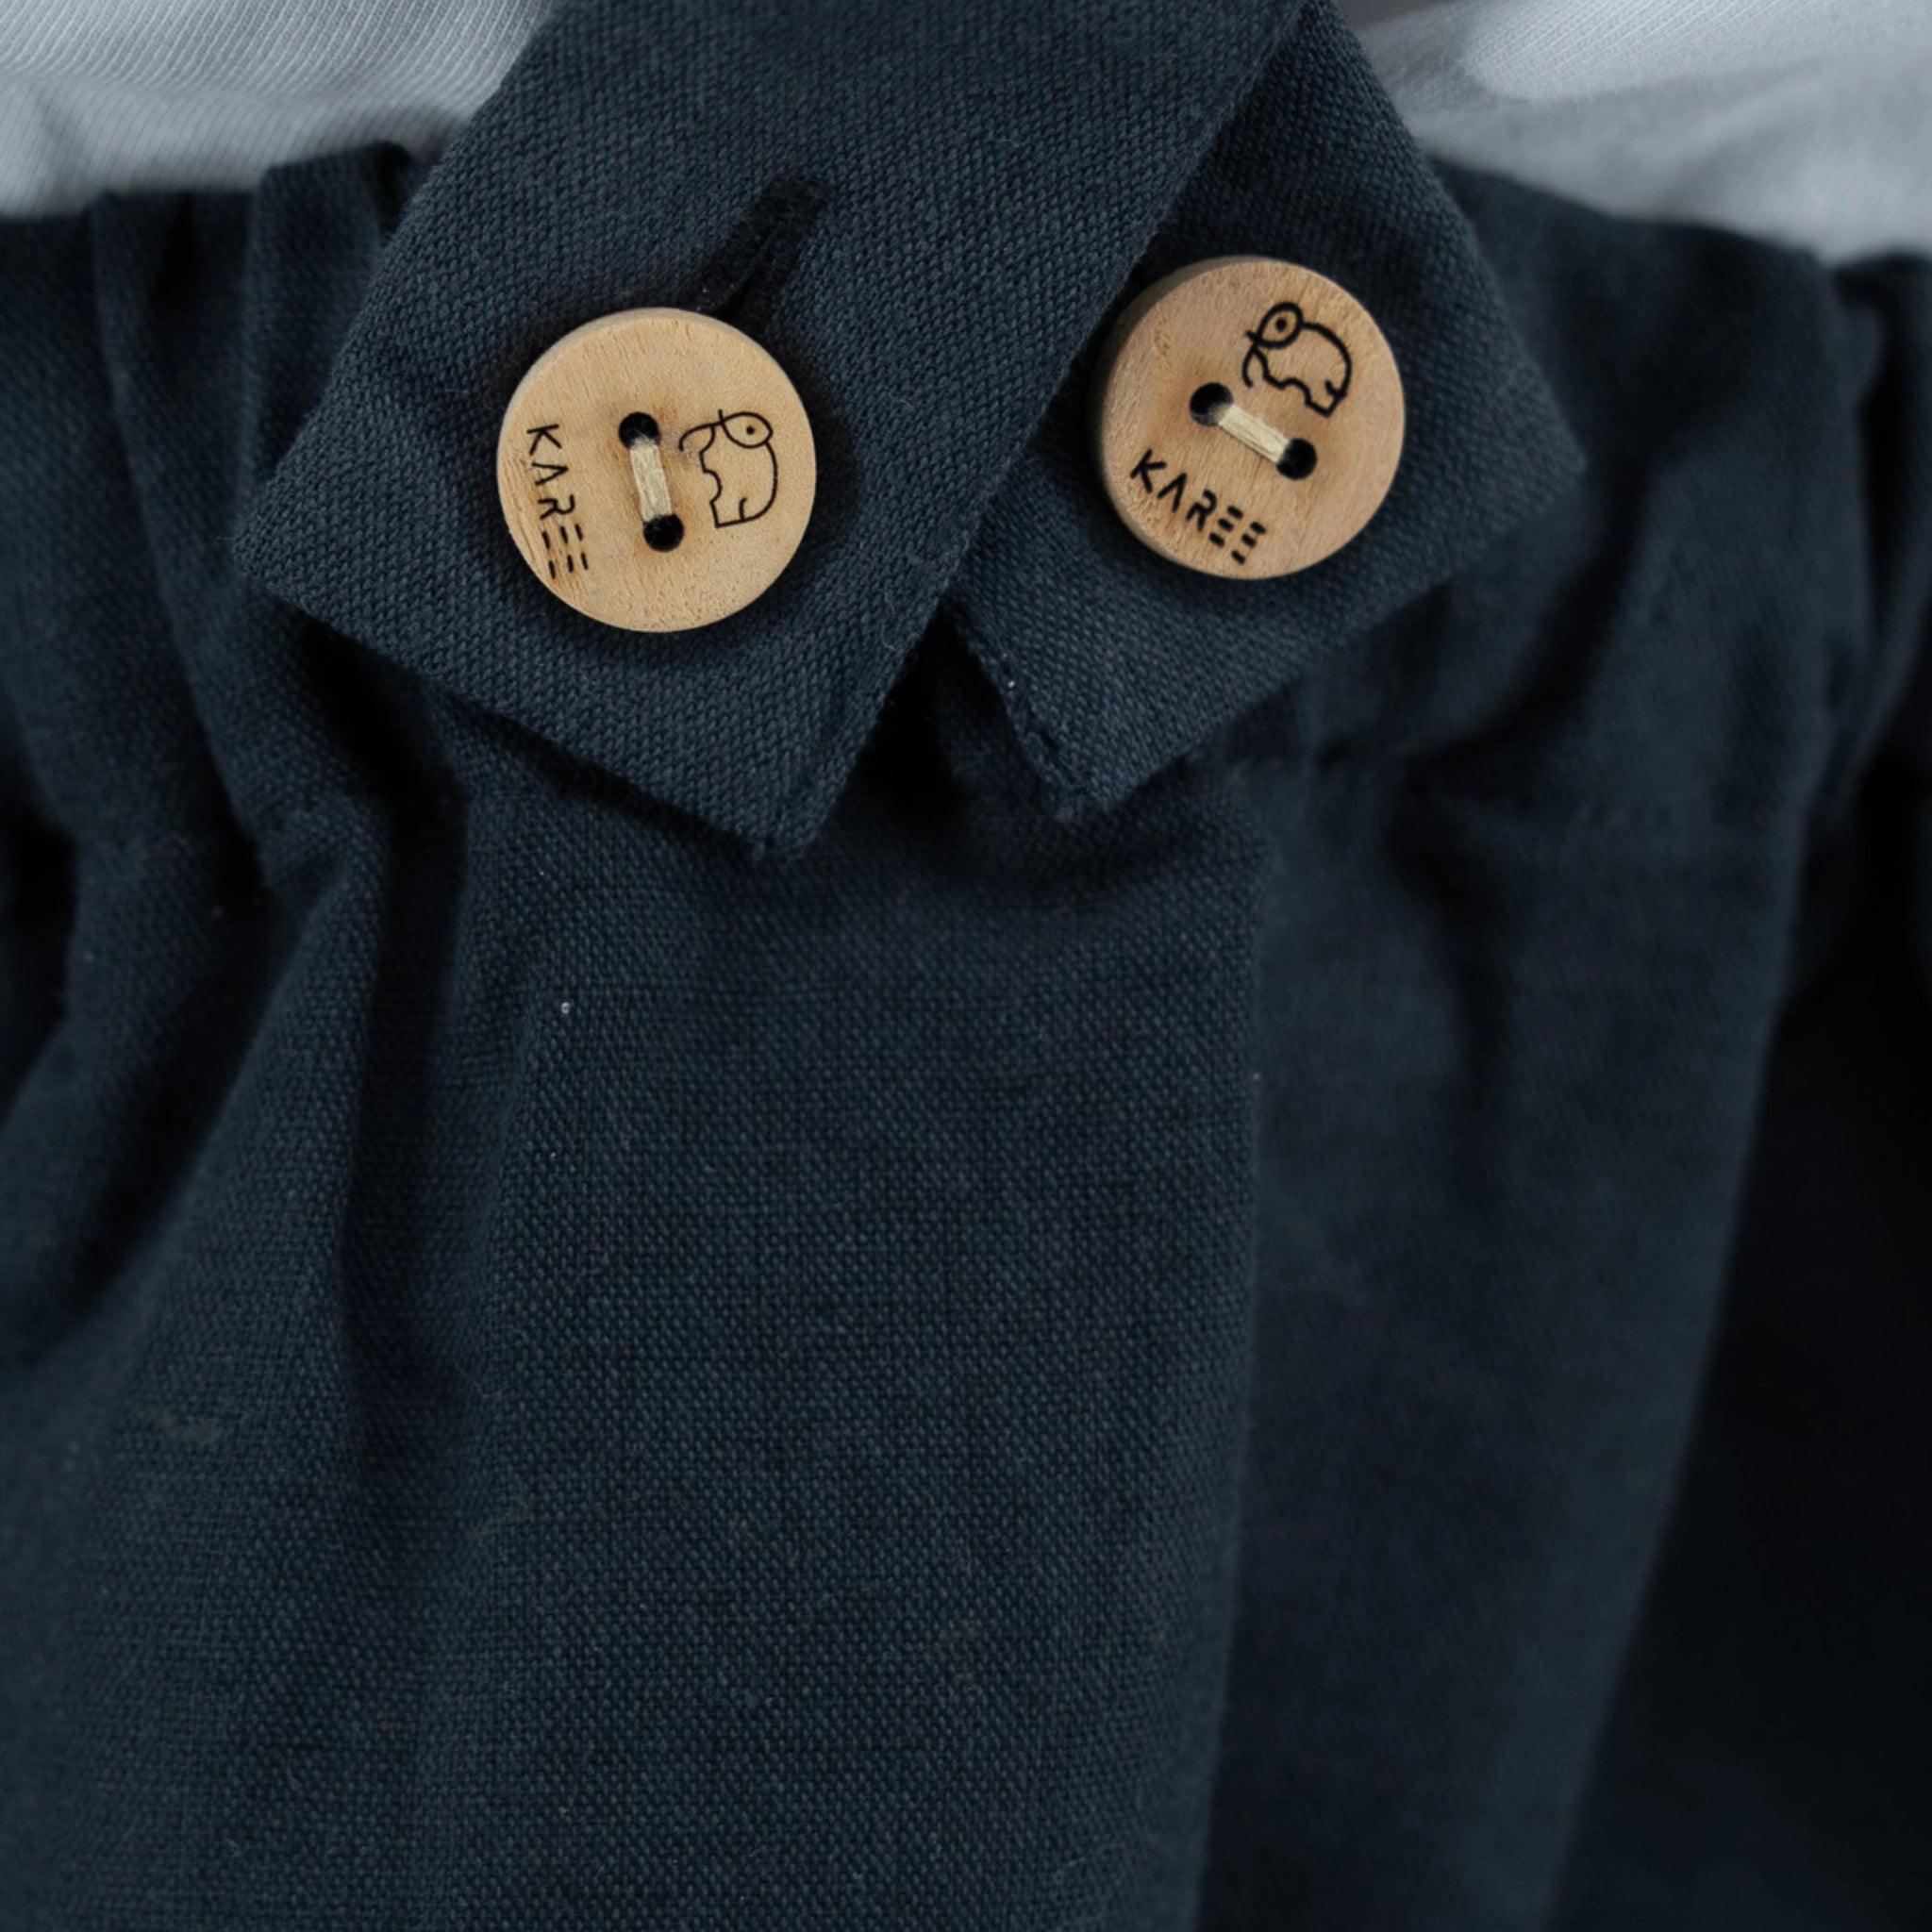 Close-up of a Karee ebony black linen pinafore for girls with two wooden buttons engraved with a key design and the text "kaze", embodying timeless sophistication.